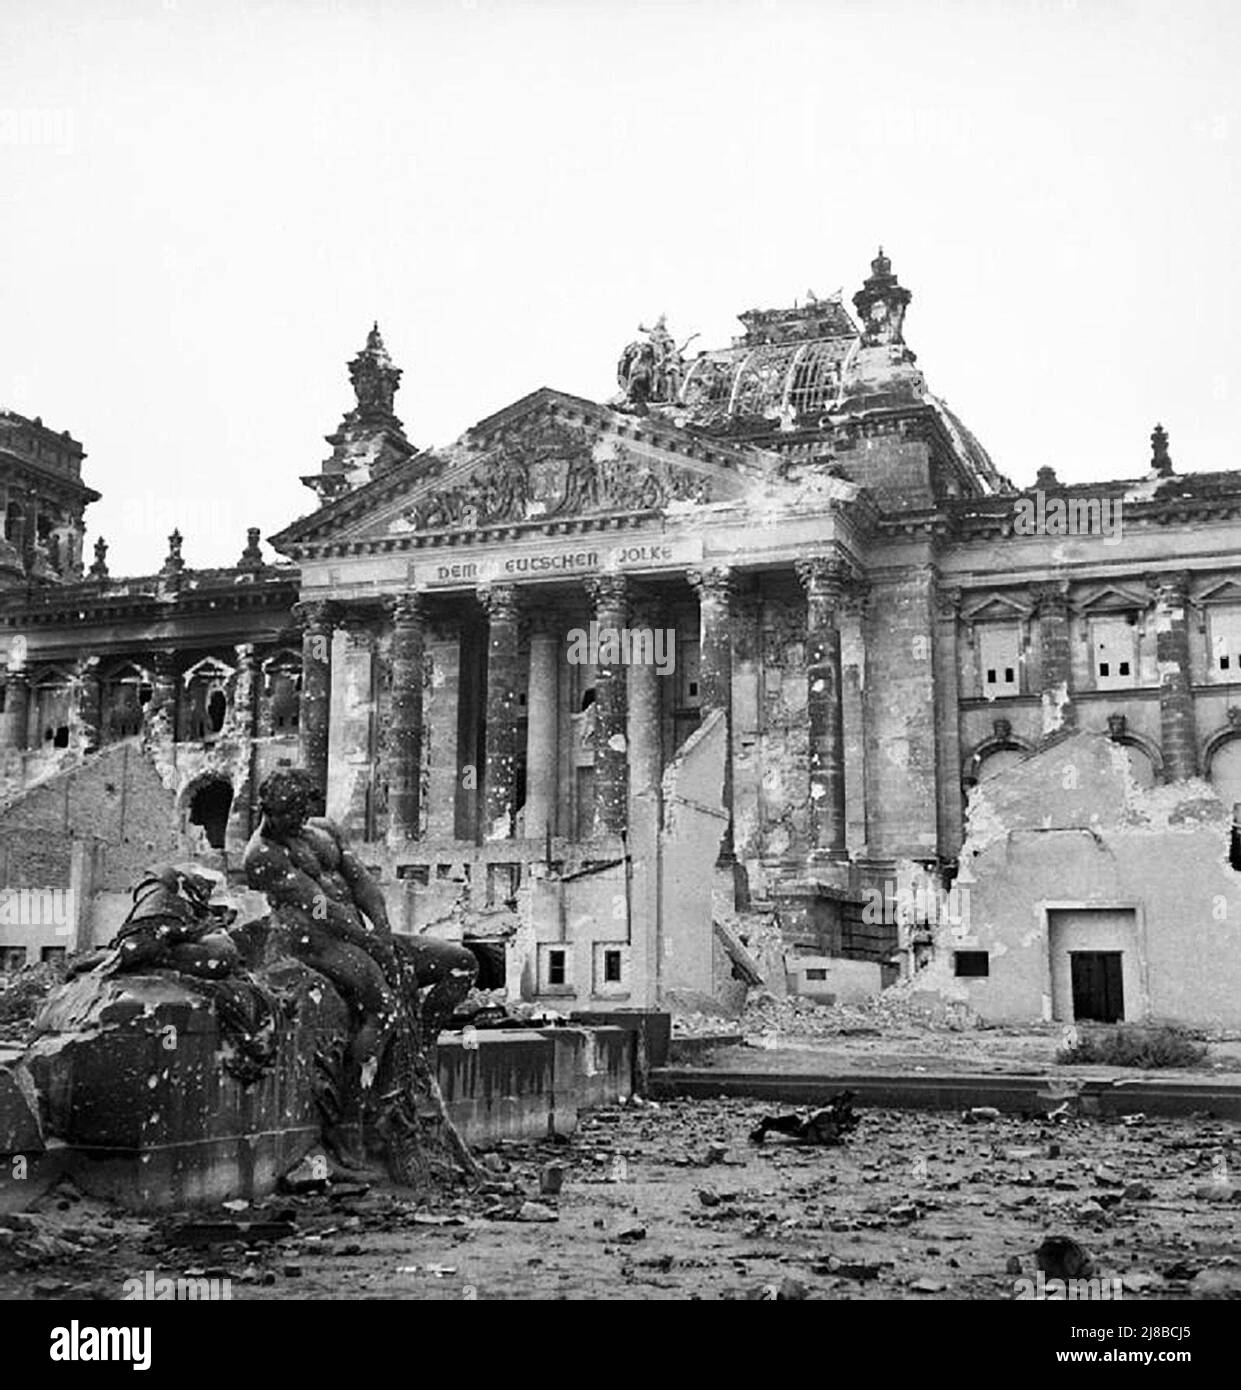 The German Reichstag in Berlin after the war, showing its heavy damage during the Battle of Berlin Stock Photo